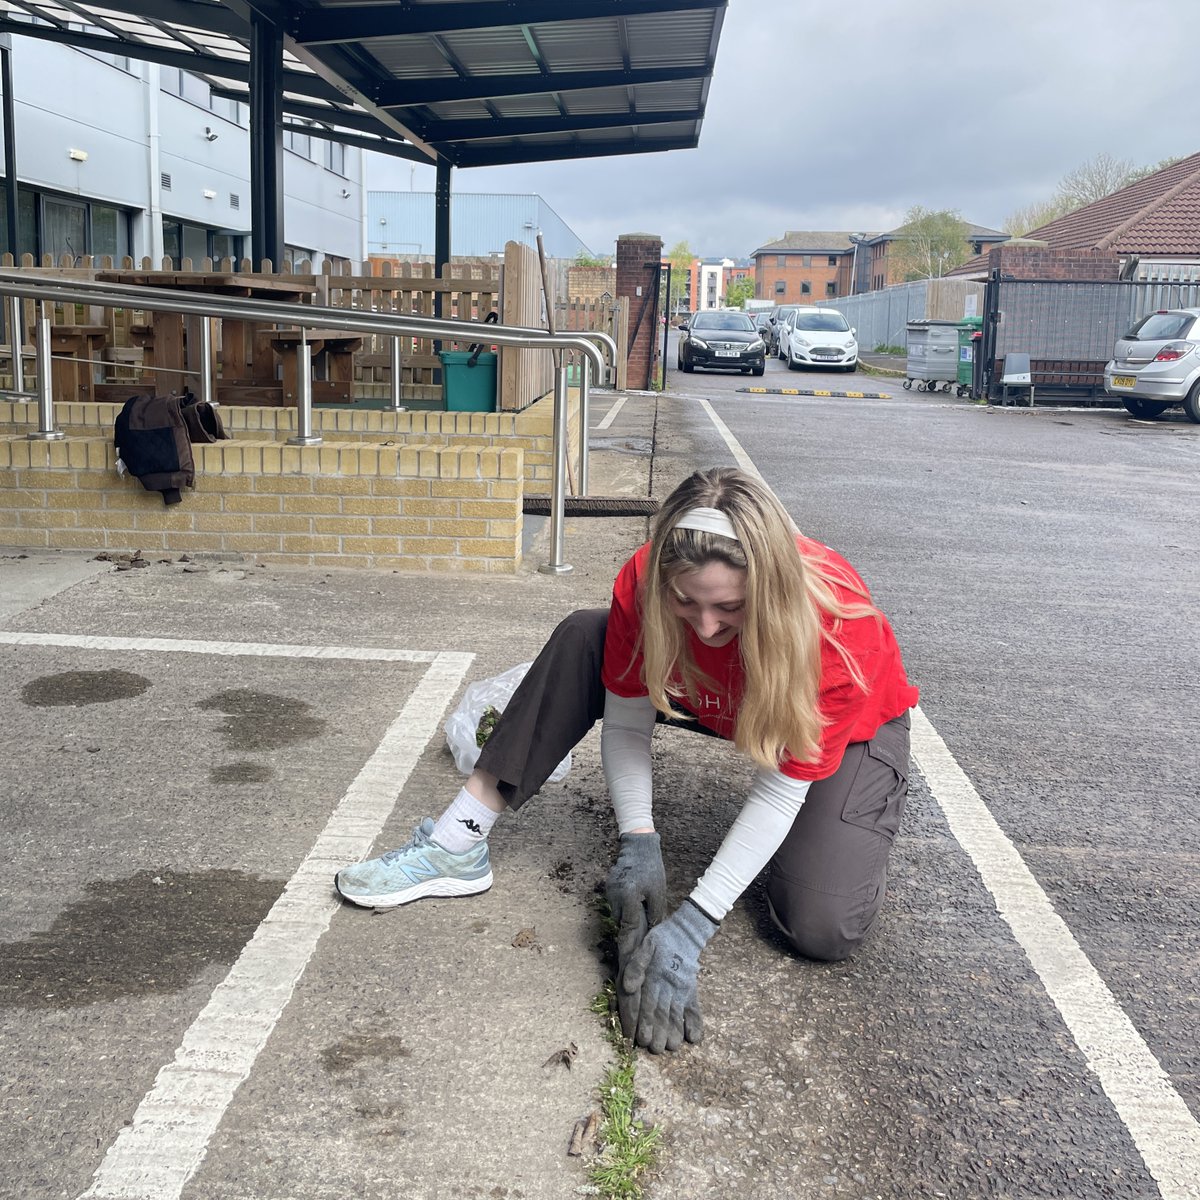 We would like to say a massive thank you to the wonderful team from @HughJamesLegal who are at our children’s centre today, volunteering and lending a hand sprucing up our well-being garden and outside spaces! 🌻